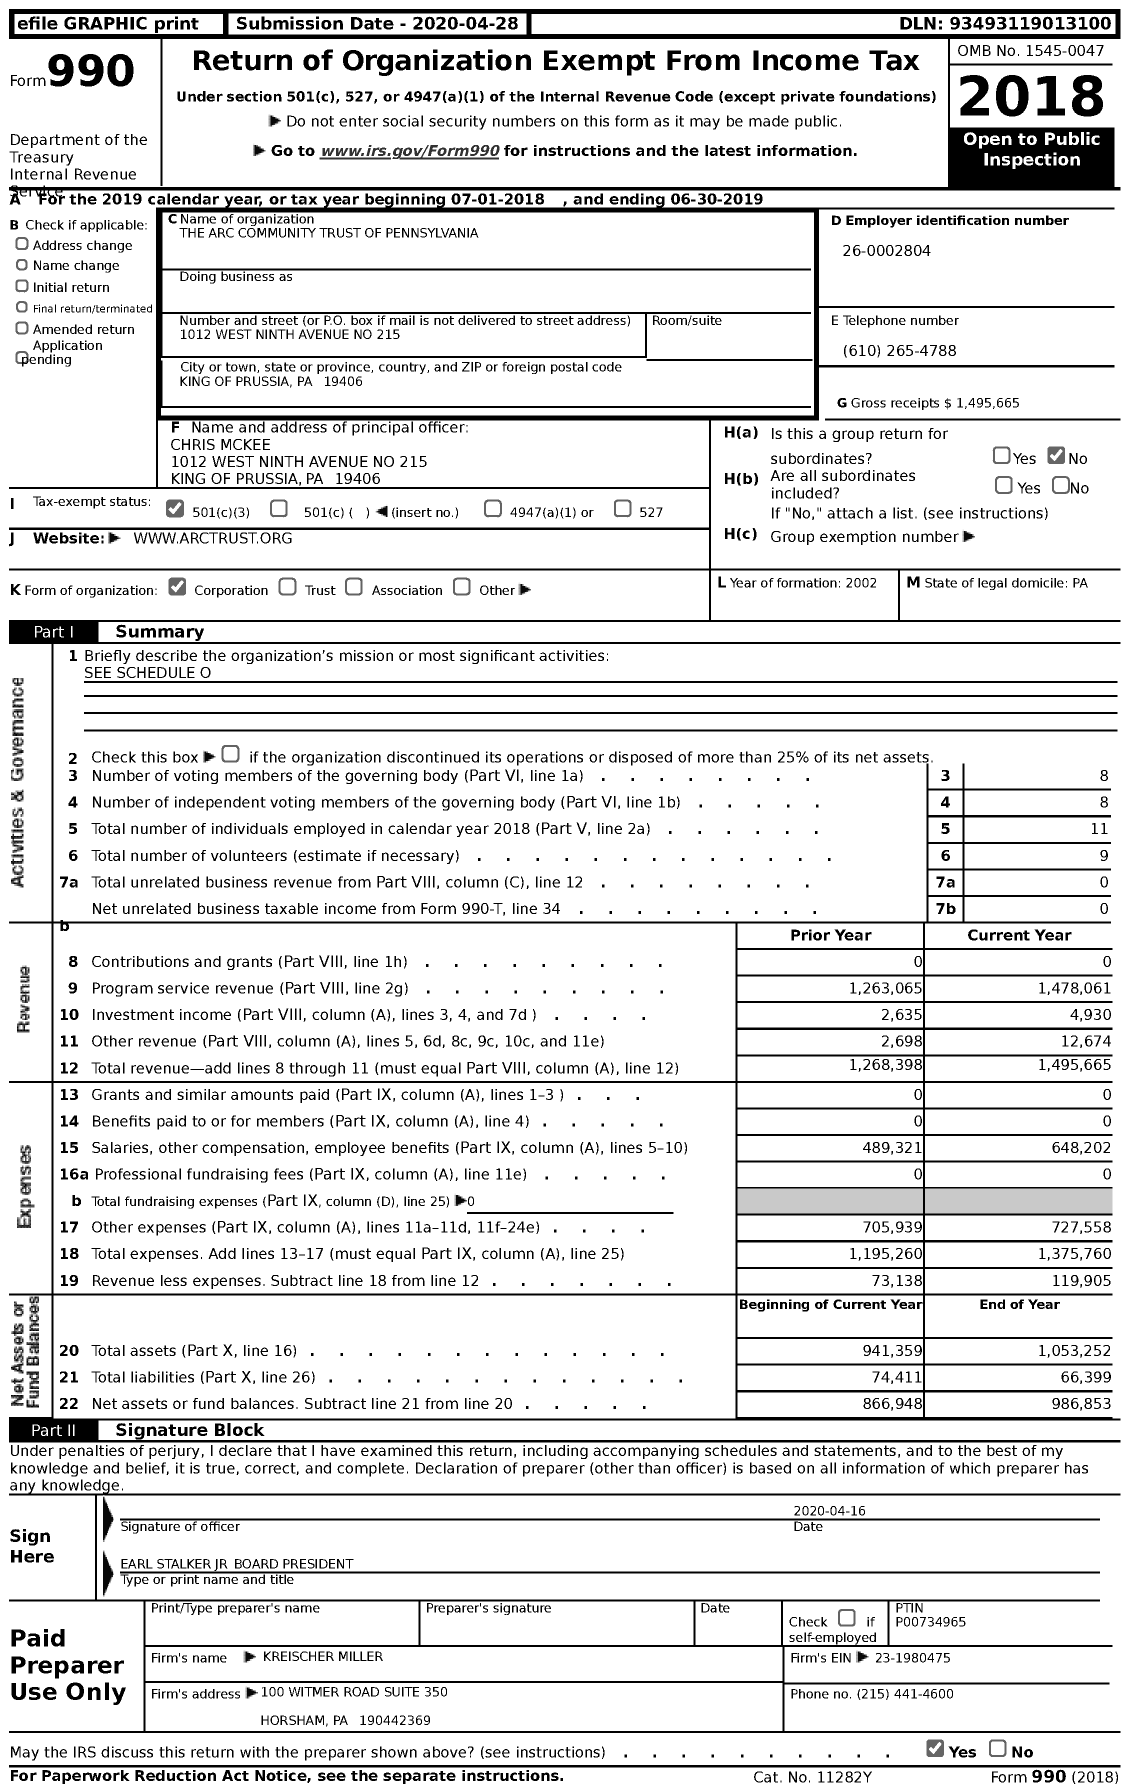 Image of first page of 2018 Form 990 for Ardent Community Trust of Pennsylvania